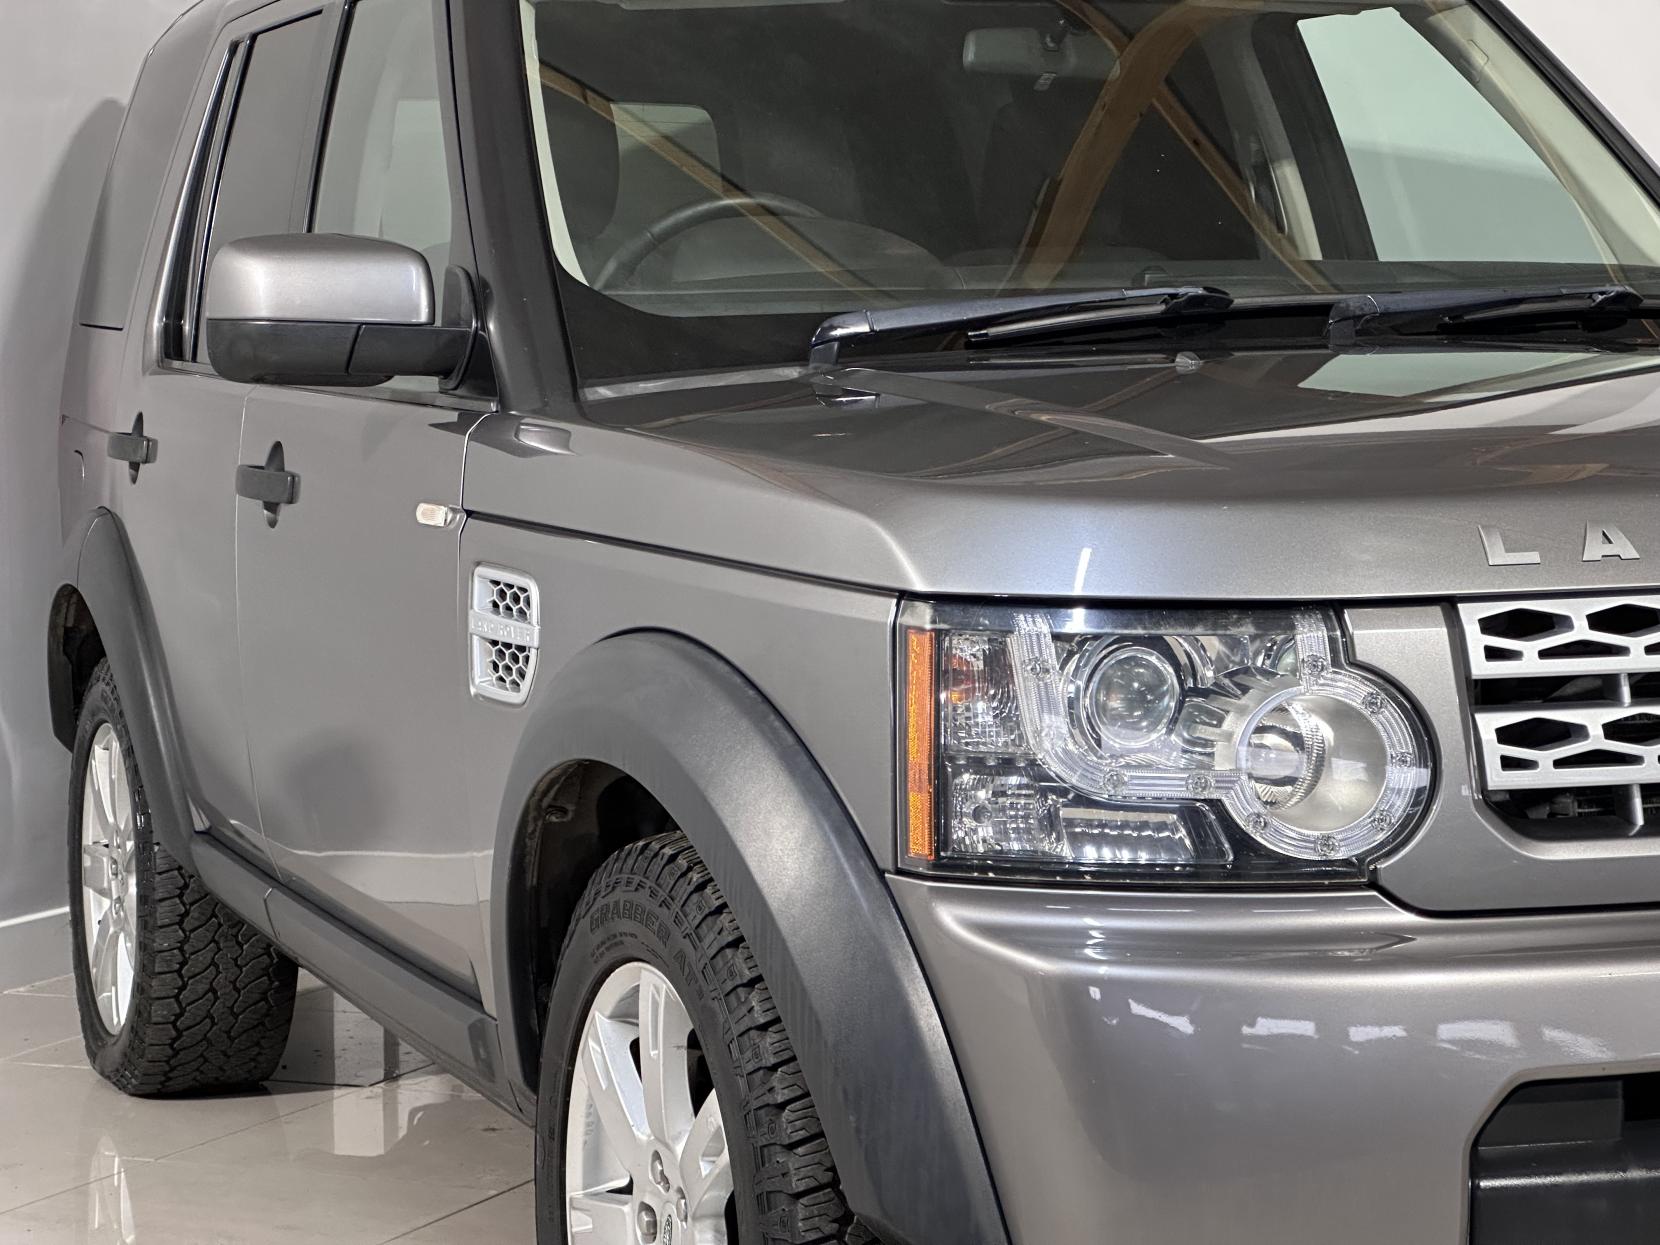 Land Rover Discovery 4 3.0 SD V6 LCV 5dr Diesel Automatic 4X4 (244 g/km, 245 bhp)